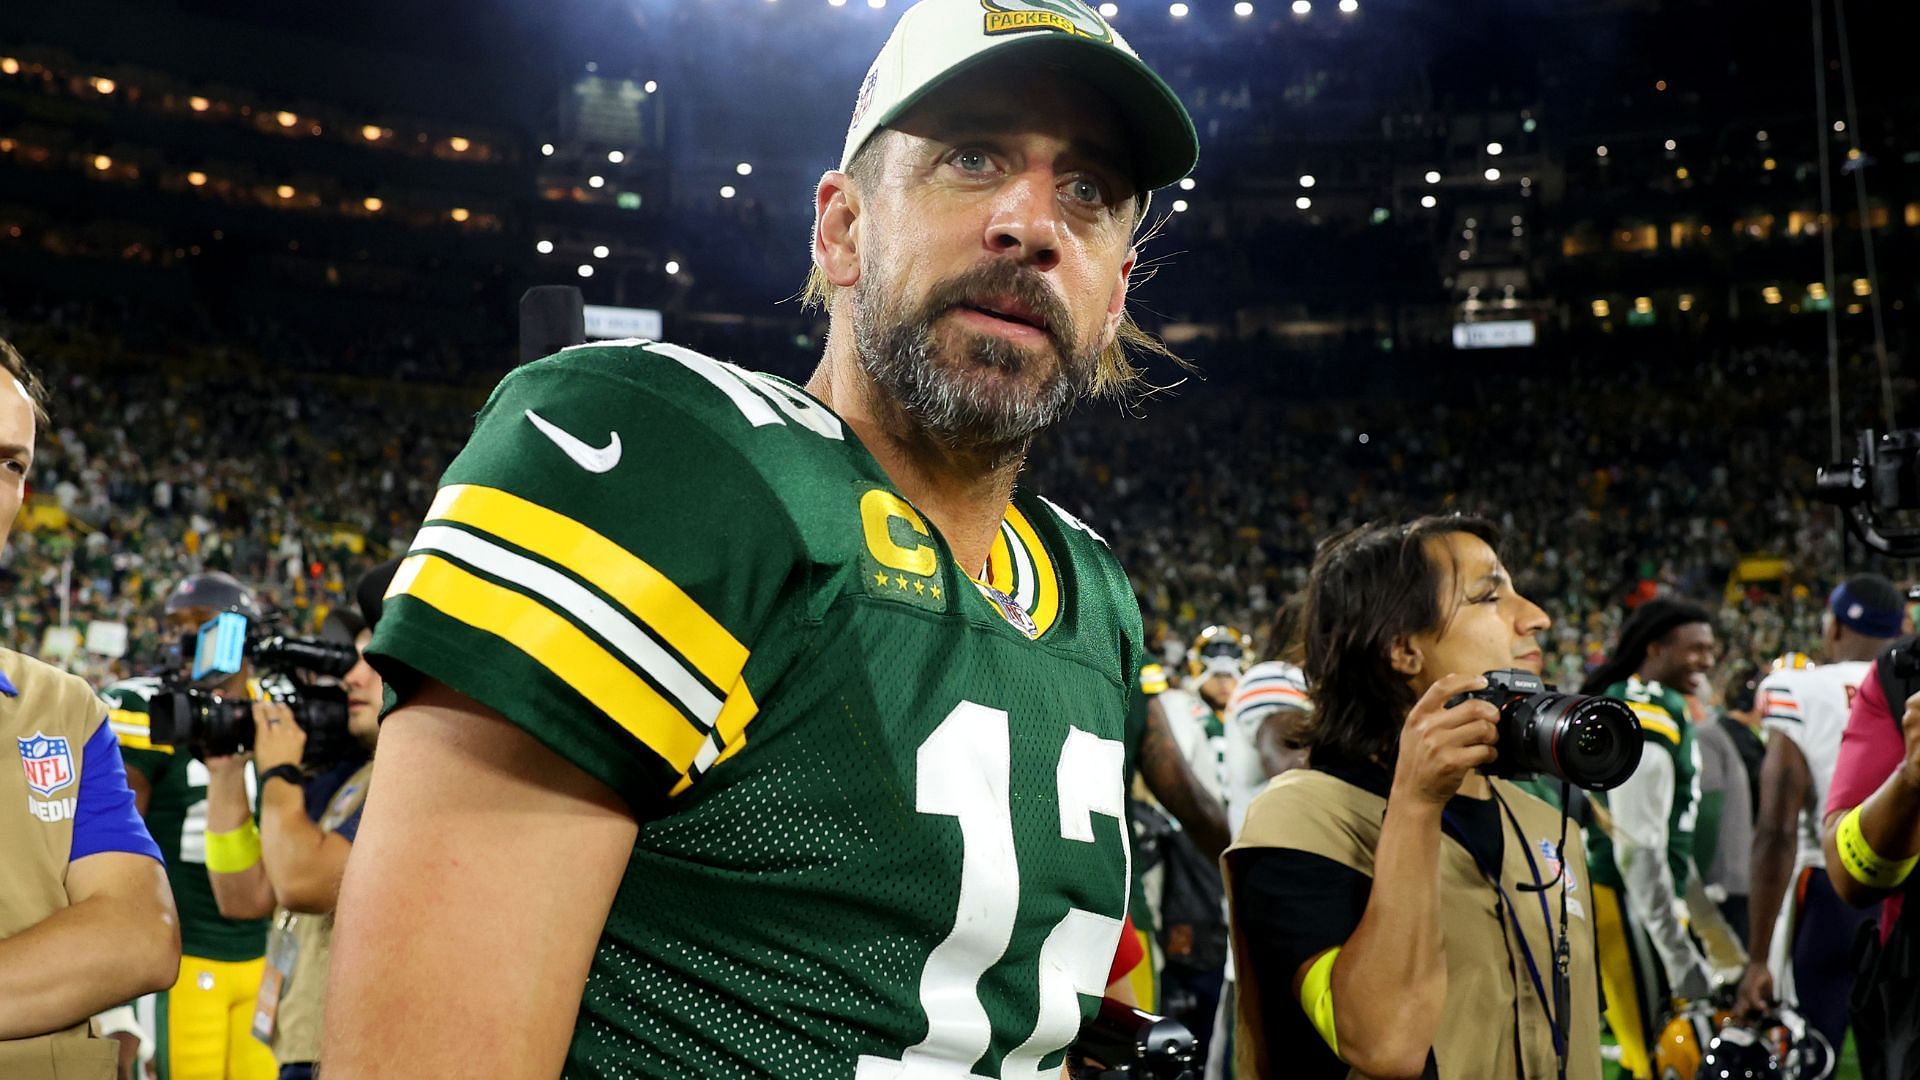 Rodgers has been with the Packers since 2005 and is the current NFL MVP